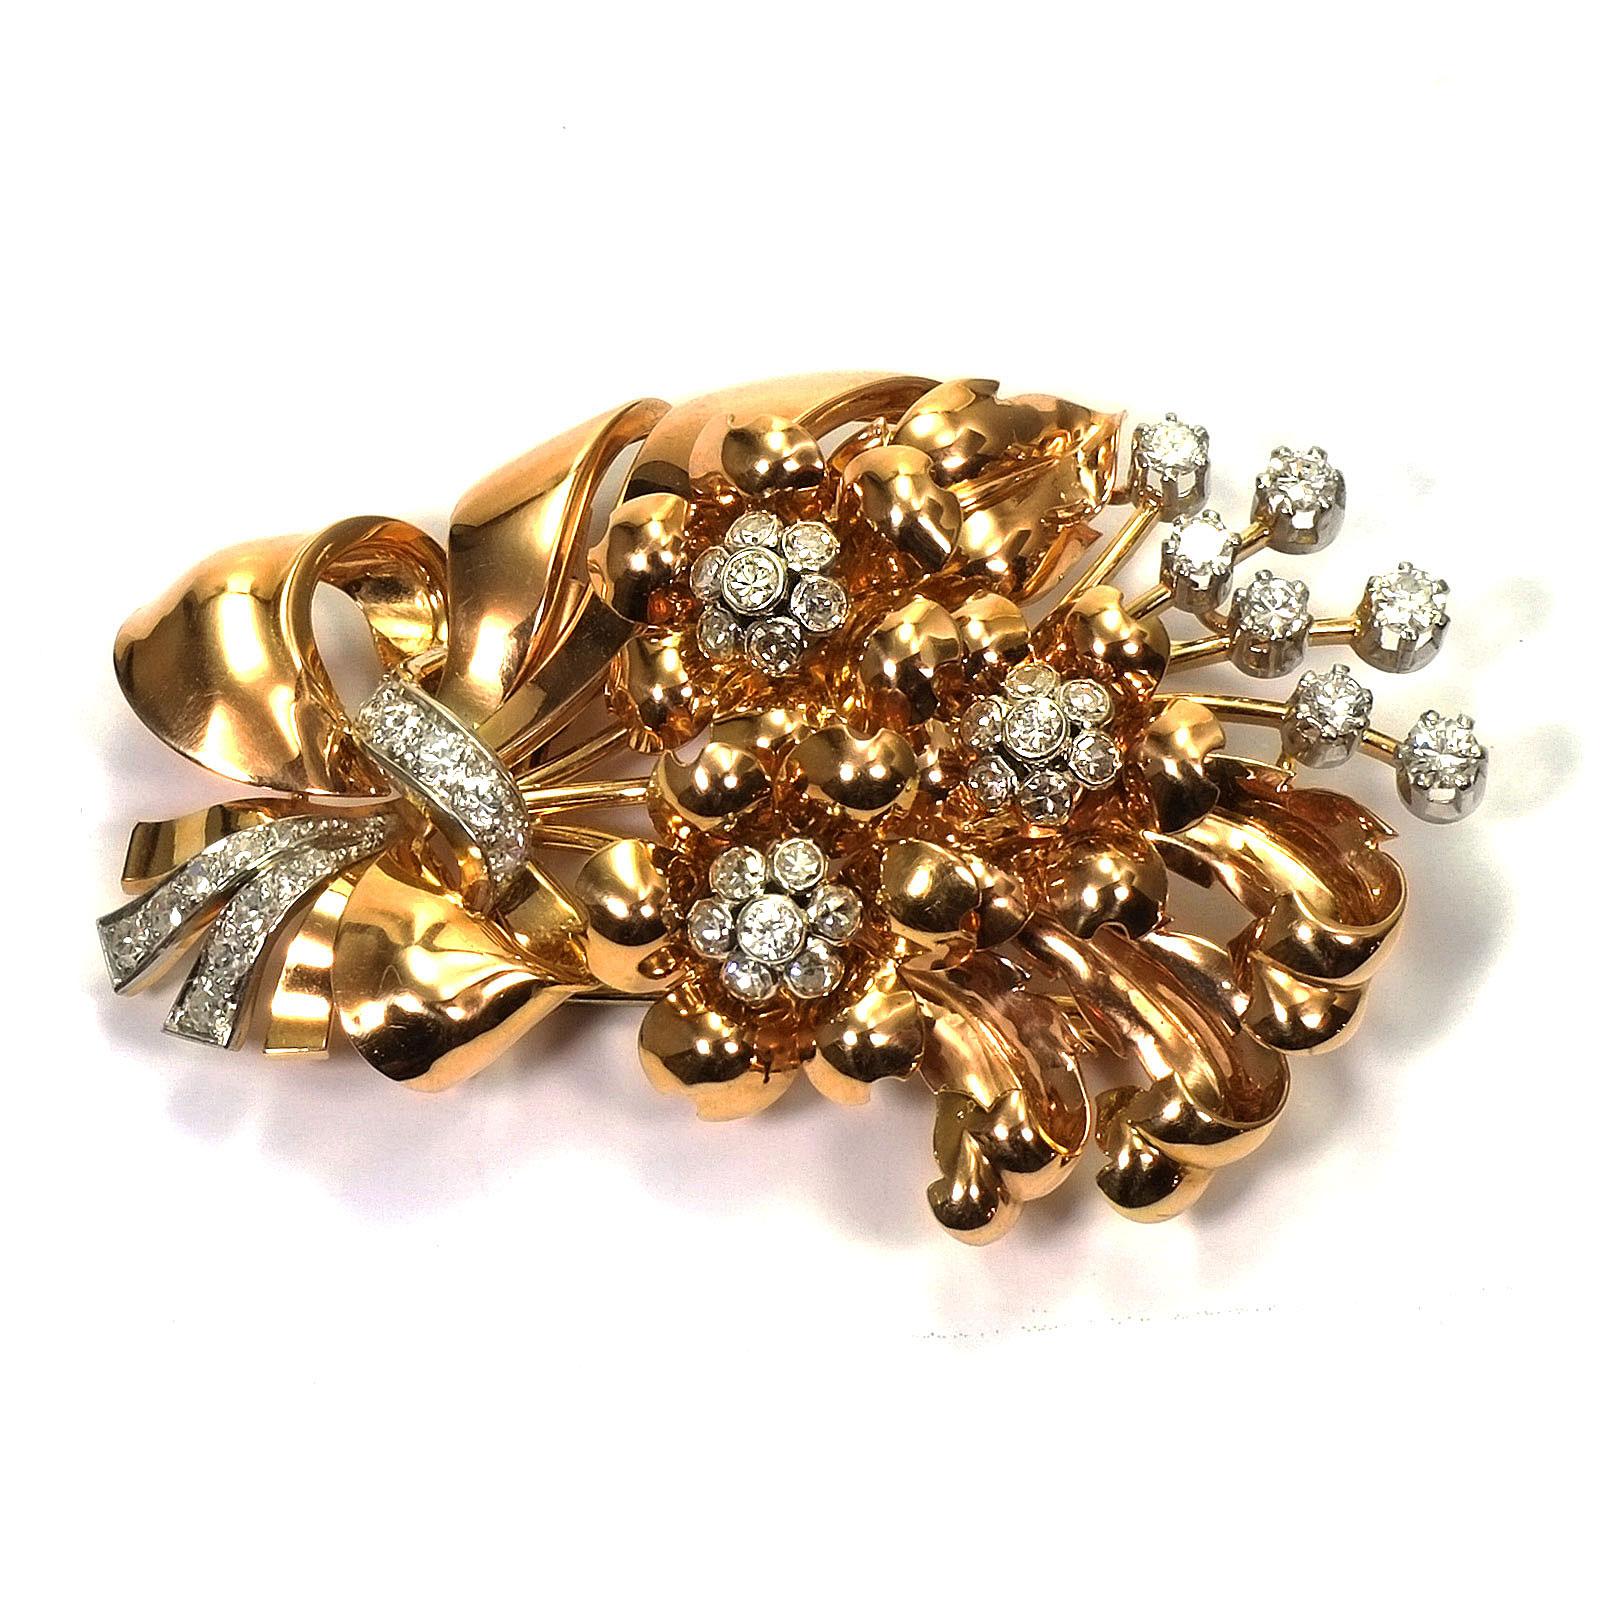 Retro 2.5 carat diamond and rose gold flower bouquet brooch circa 1945

This representative rose gold diamond brooch is designed as a magnificent bouquet of flowers with naturalistically worked blossoms and leaf tendrils, set with sparkling diamonds